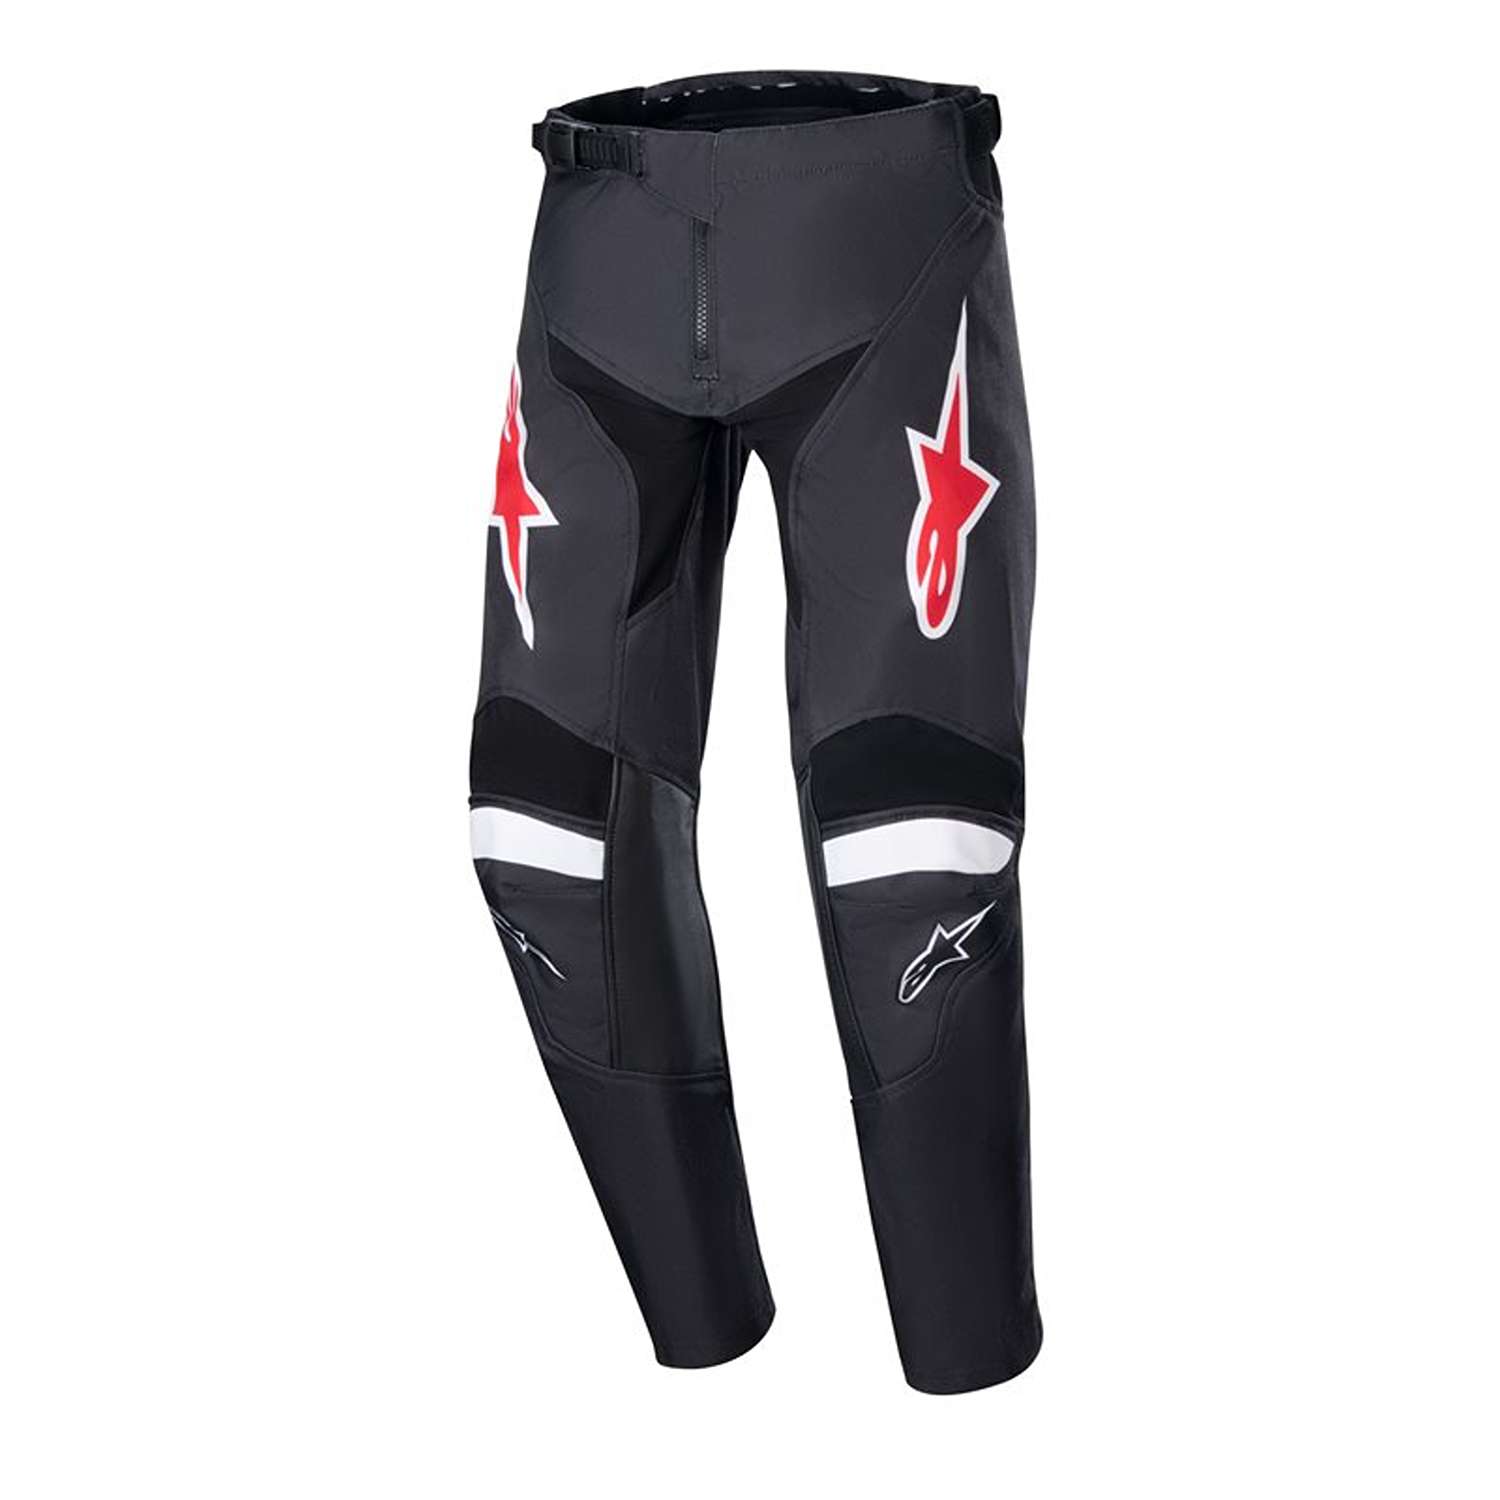 Image of EU Alpinestars Youth Racer Lucent Pants Black White Taille 22